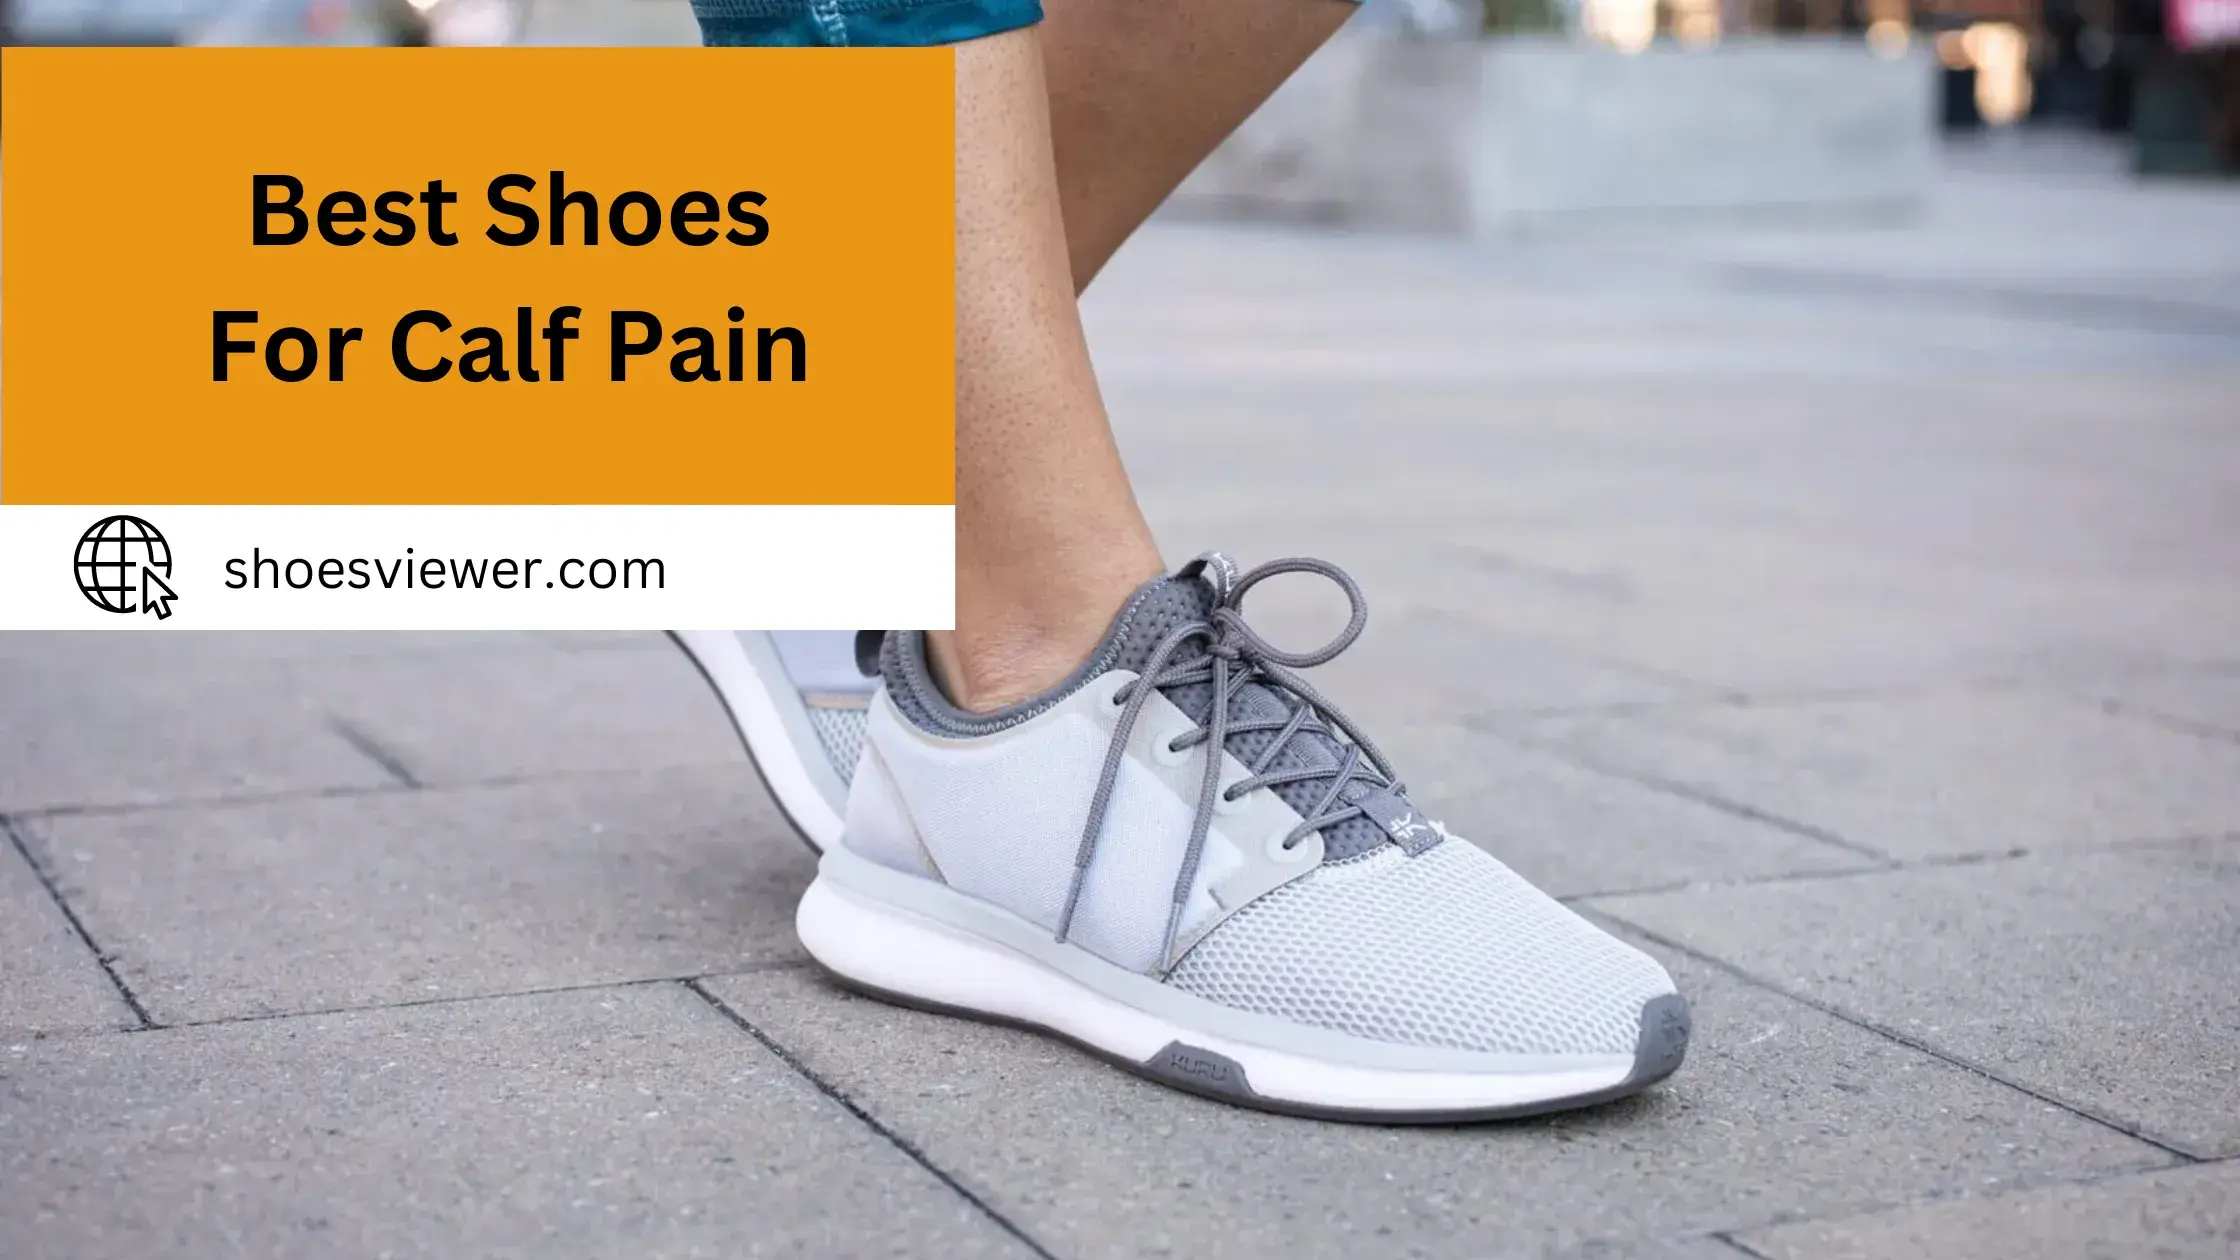 Best Shoes For Calf Pain- (An In-Depth Guide)